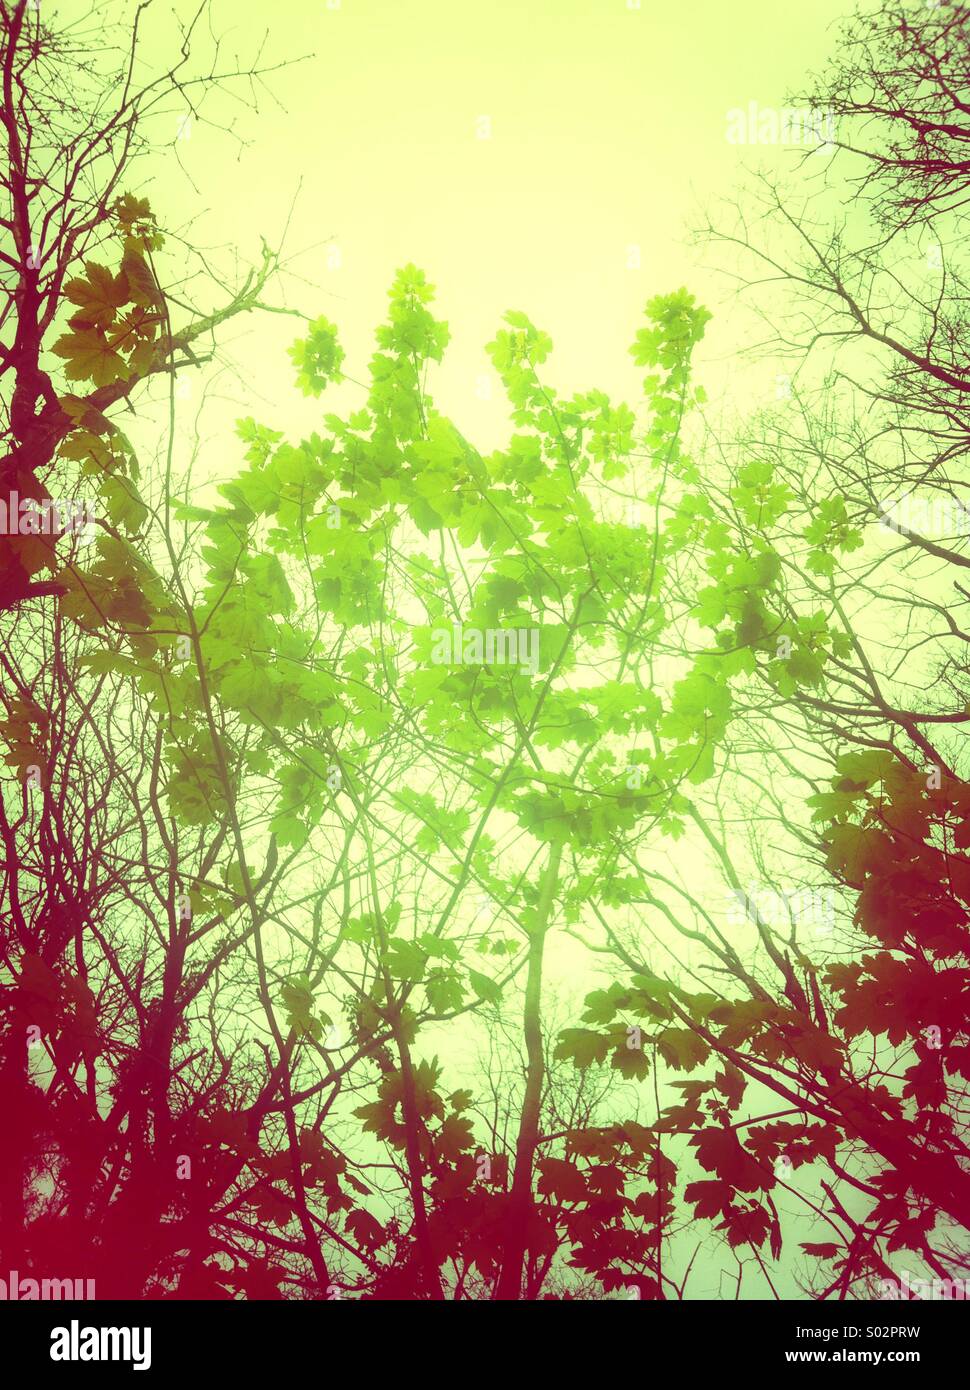 Green leaves tree branches in spring Stock Photo